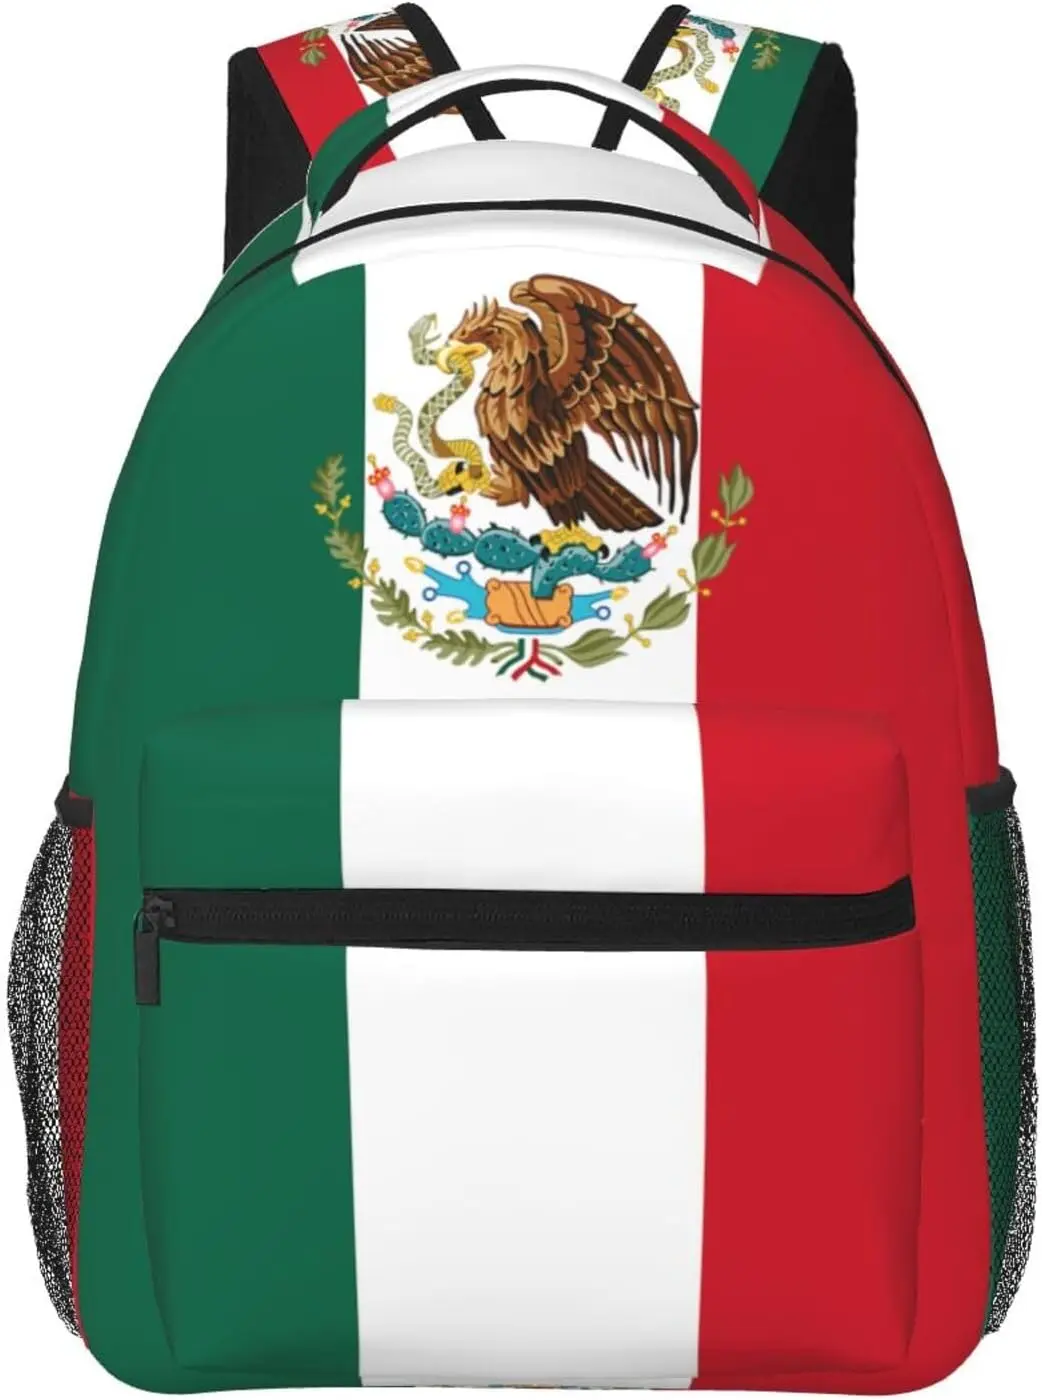 

Mexico Mexican Flag Backpack Casual Hiking Camping Travel Backpacks Lightweight Daypack Bag Women Men Bookbag